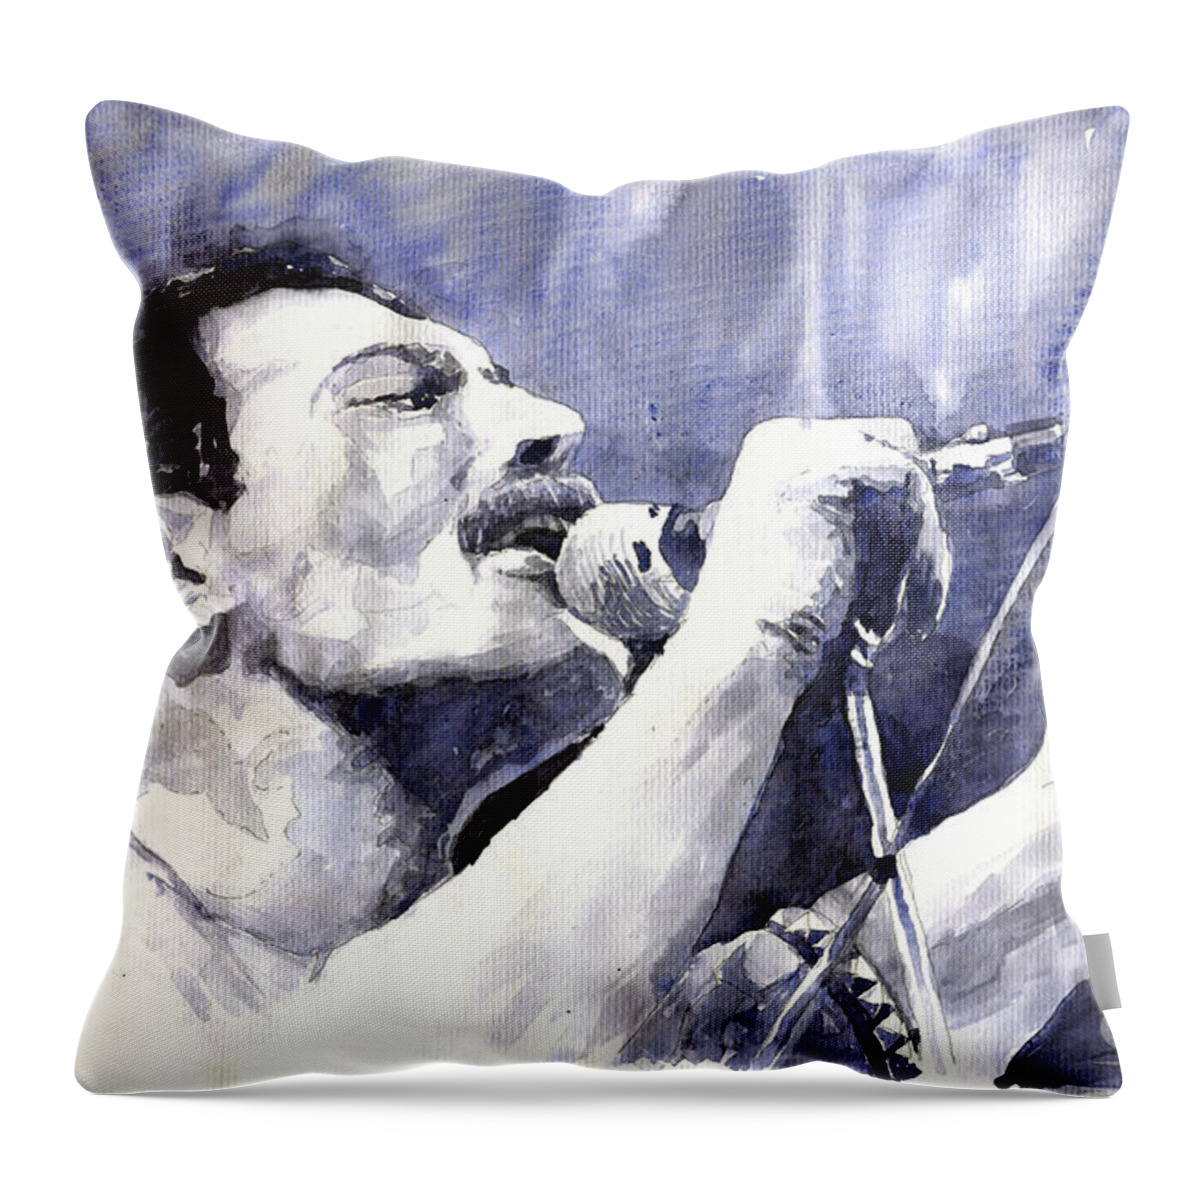 Watercolor Throw Pillow featuring the painting Freddie Mercury by Yuriy Shevchuk